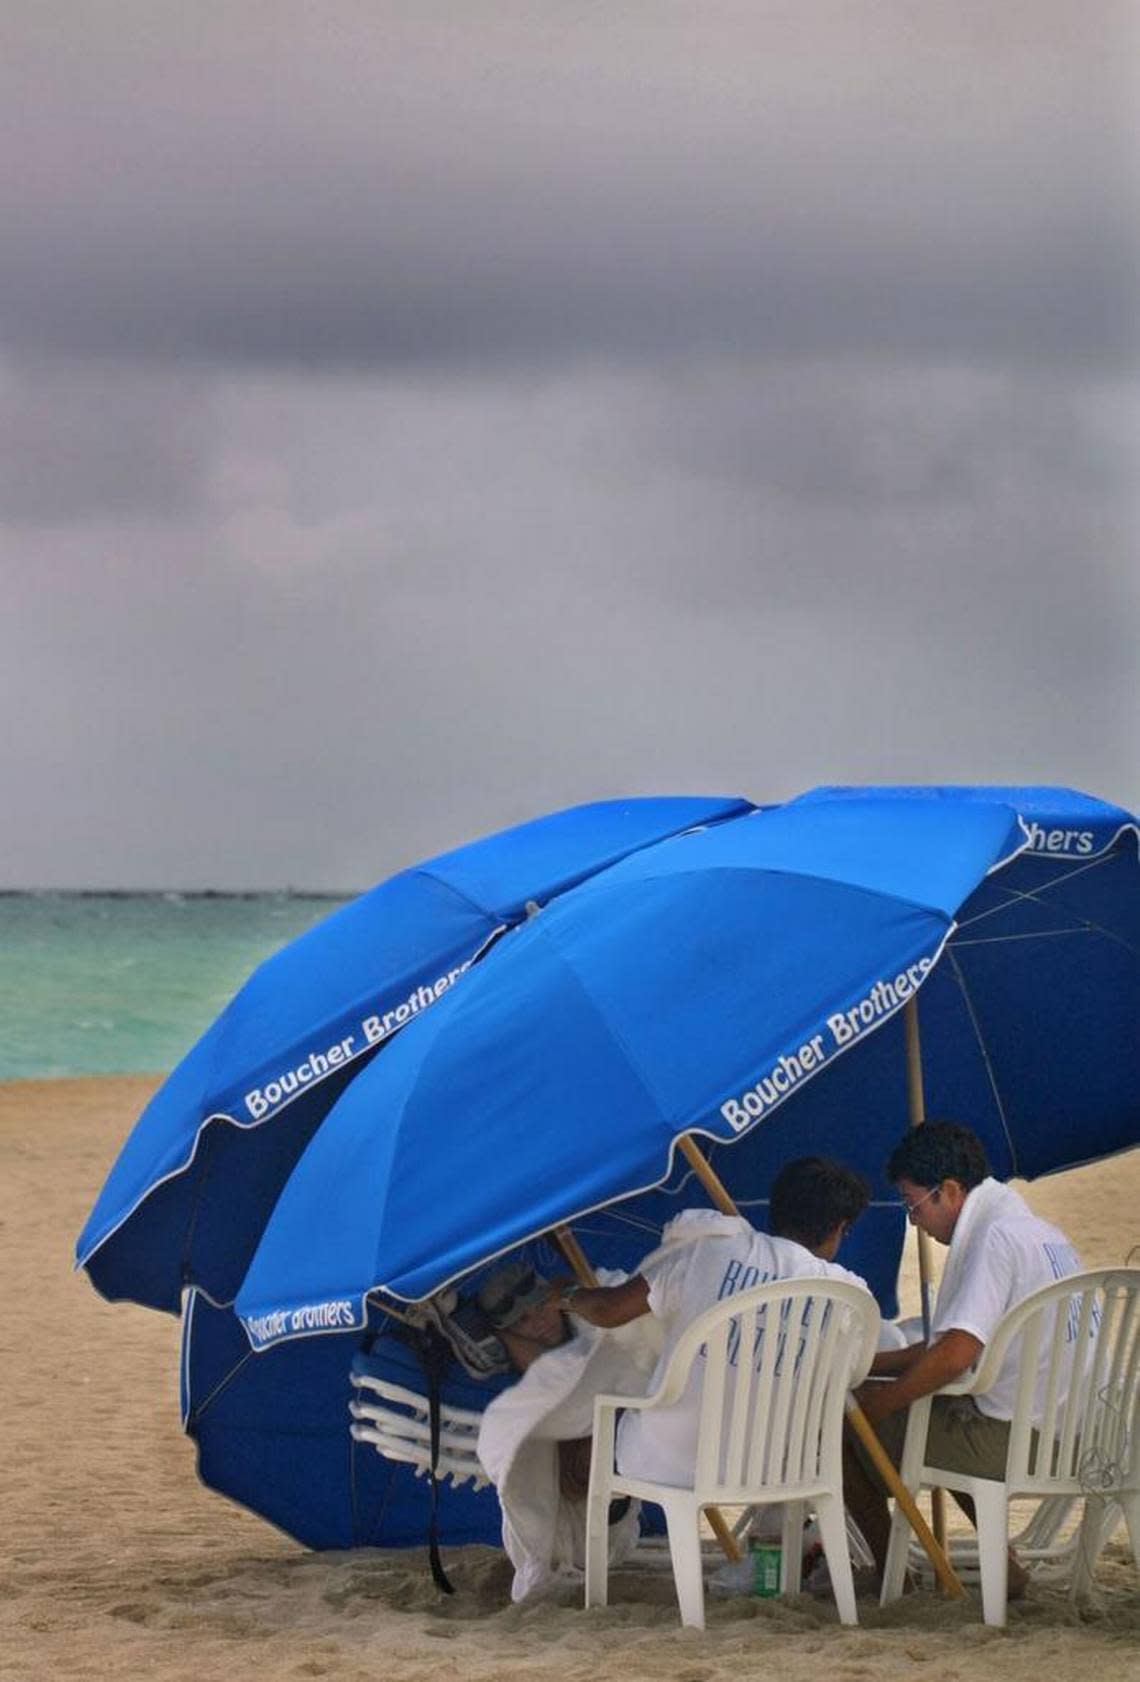 Boucher Brothers holds contracts renting out umbrellas and chairs to beach-goers.